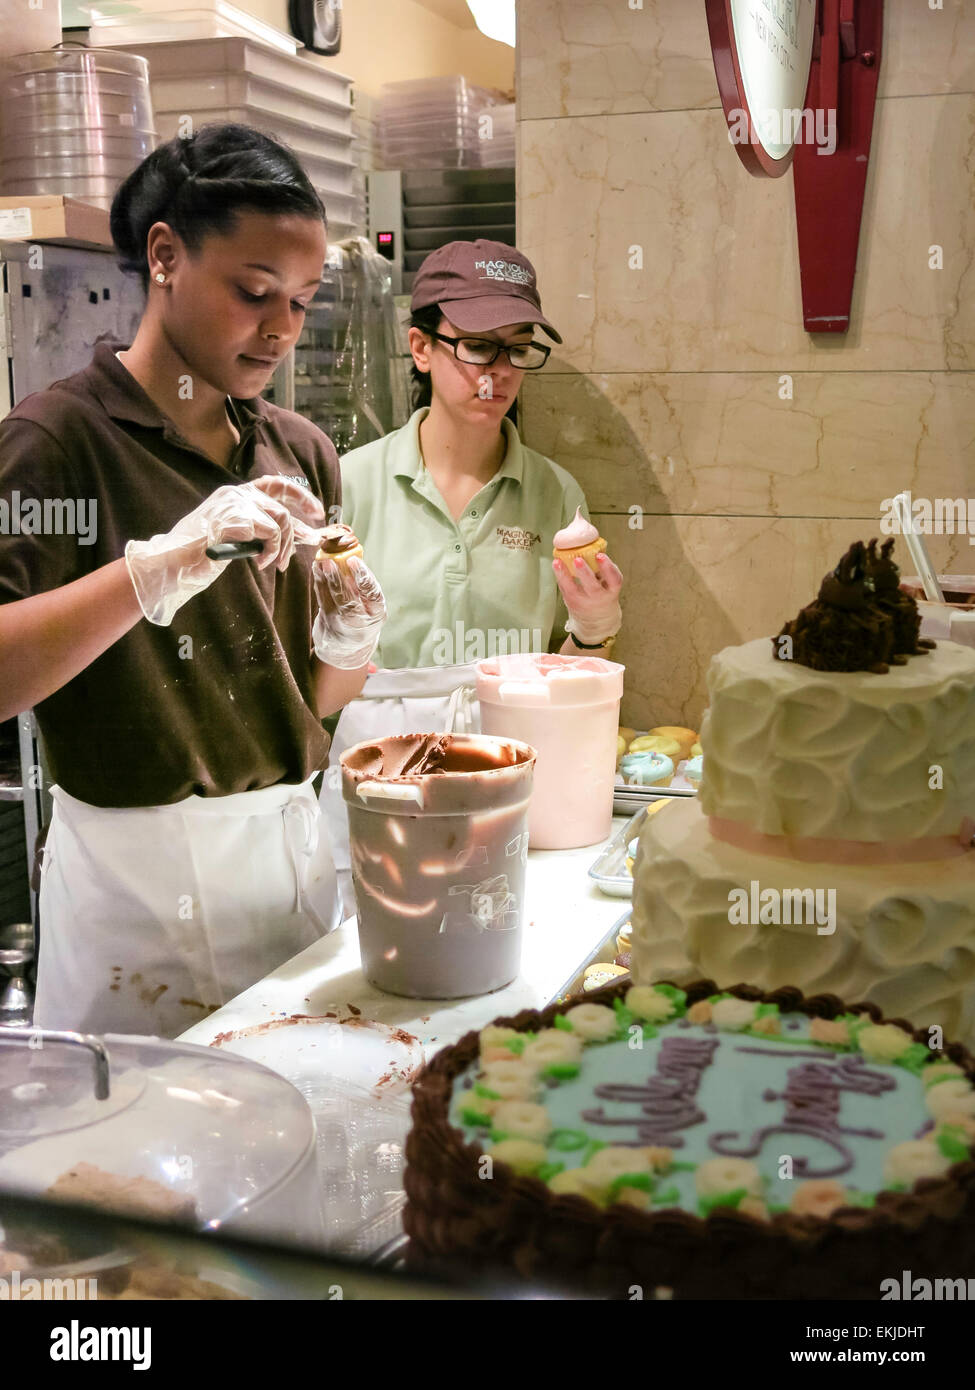 Workers Frosting Cupcakes, Magnolia Bakery, Grand Central Terminal, NYC, USA Stock Photo